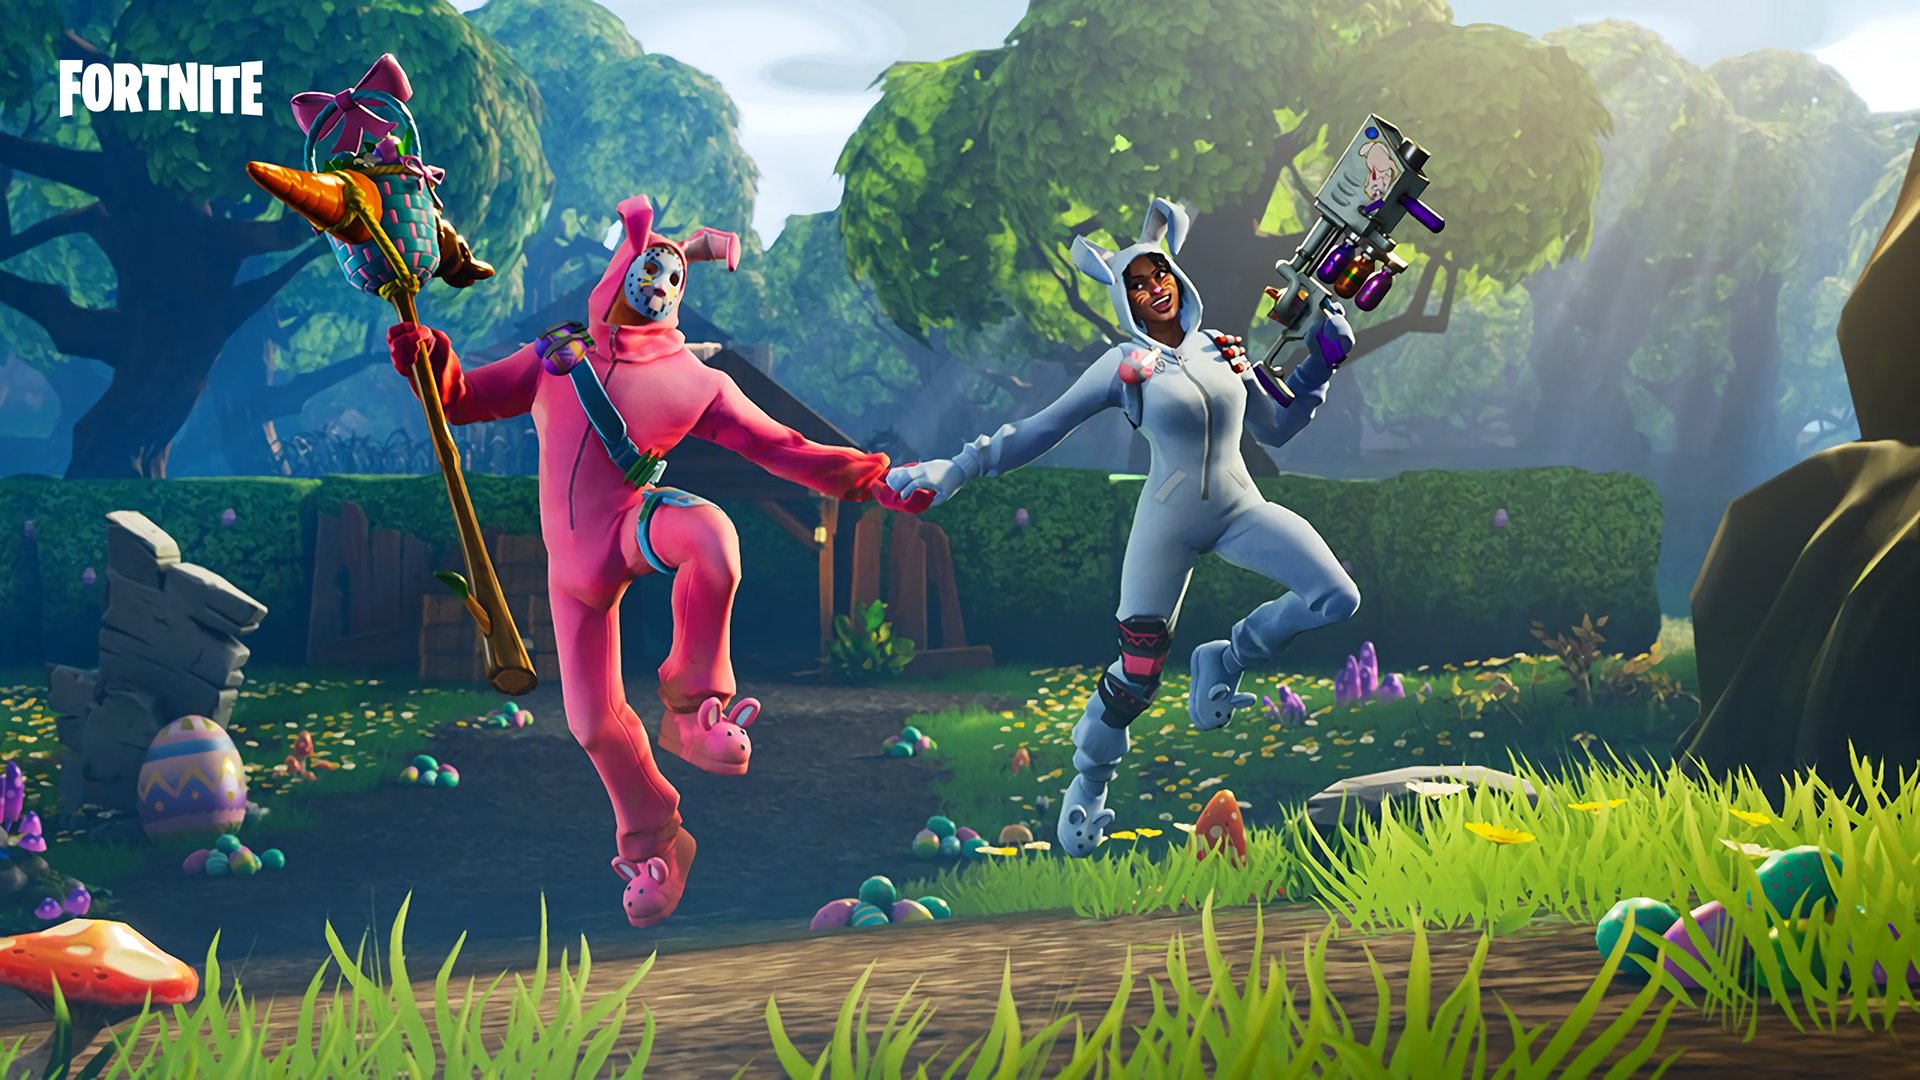 Fortnite Bunny Brawler Skin Outfit Pngs Image Pro Game Guides